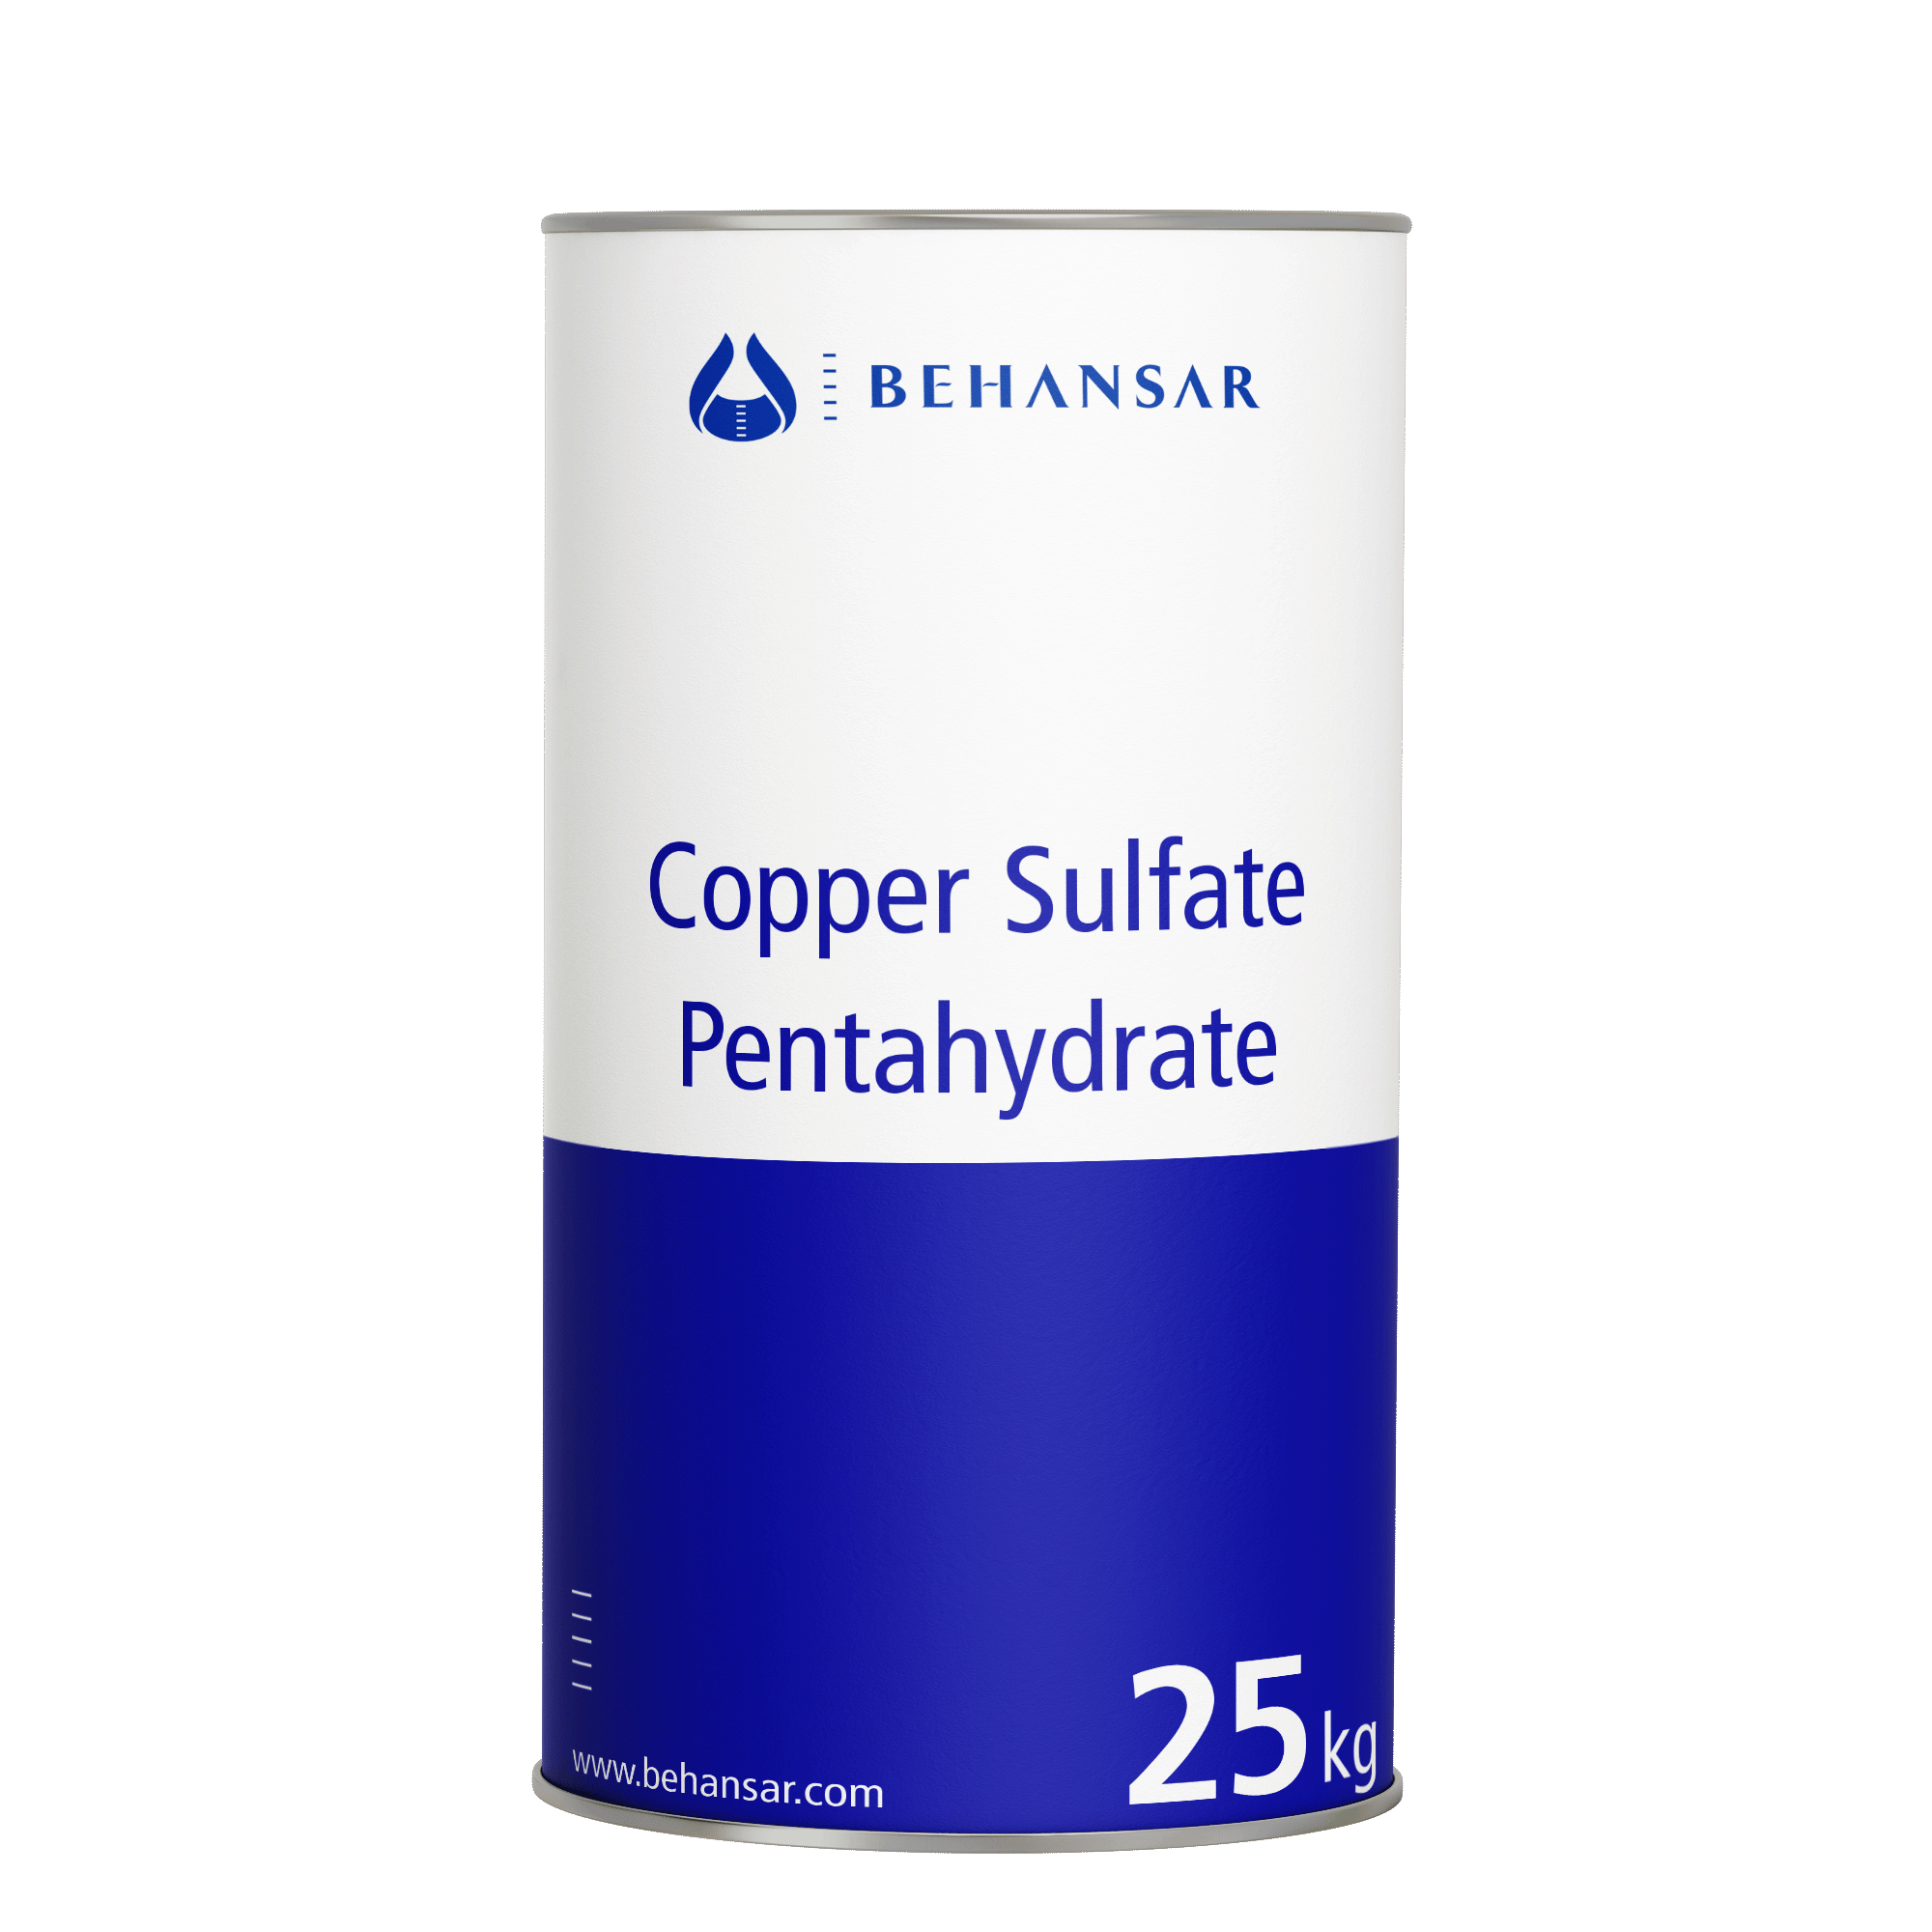 Copper Sulfate Pentahydrate is one of the products of Behansar Co